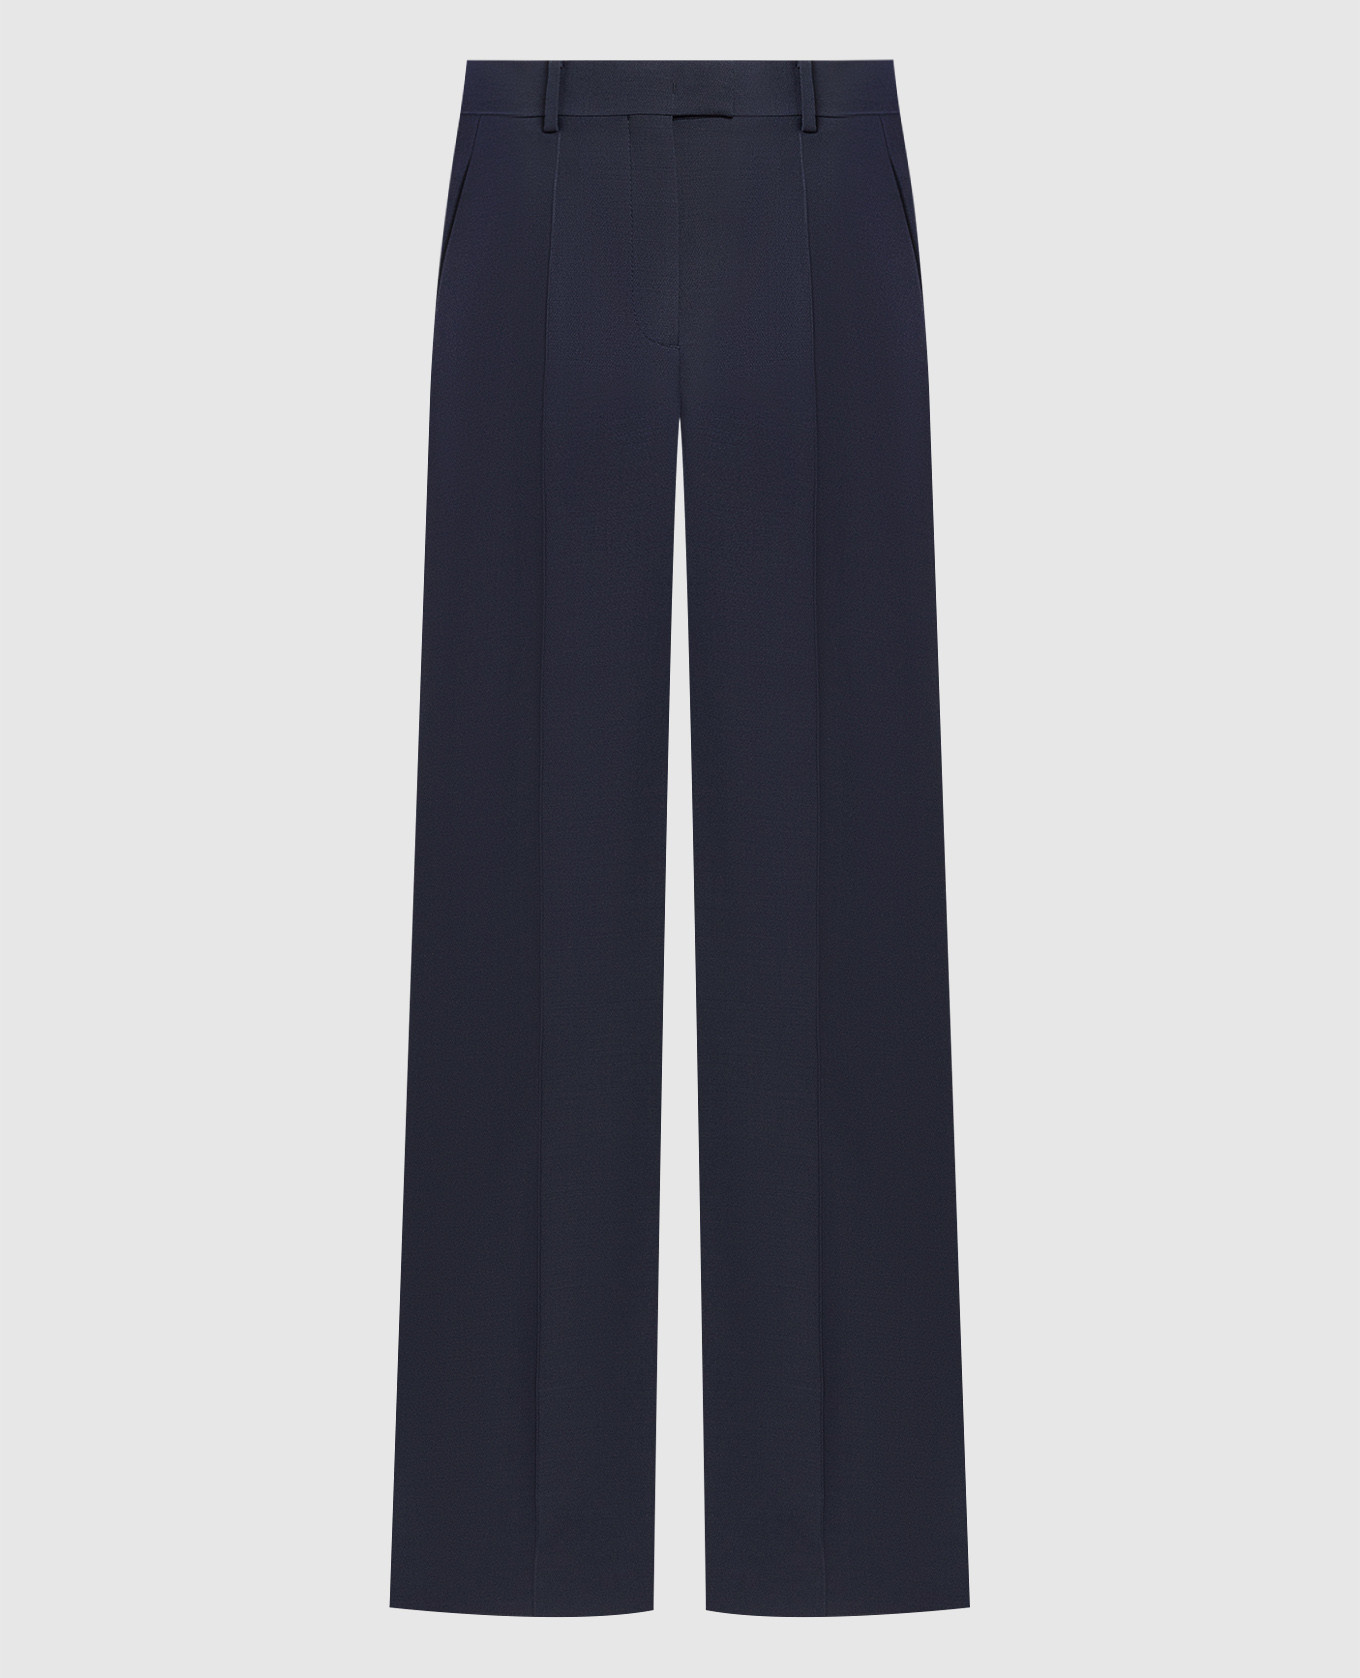 Blue trousers made of wool and silk